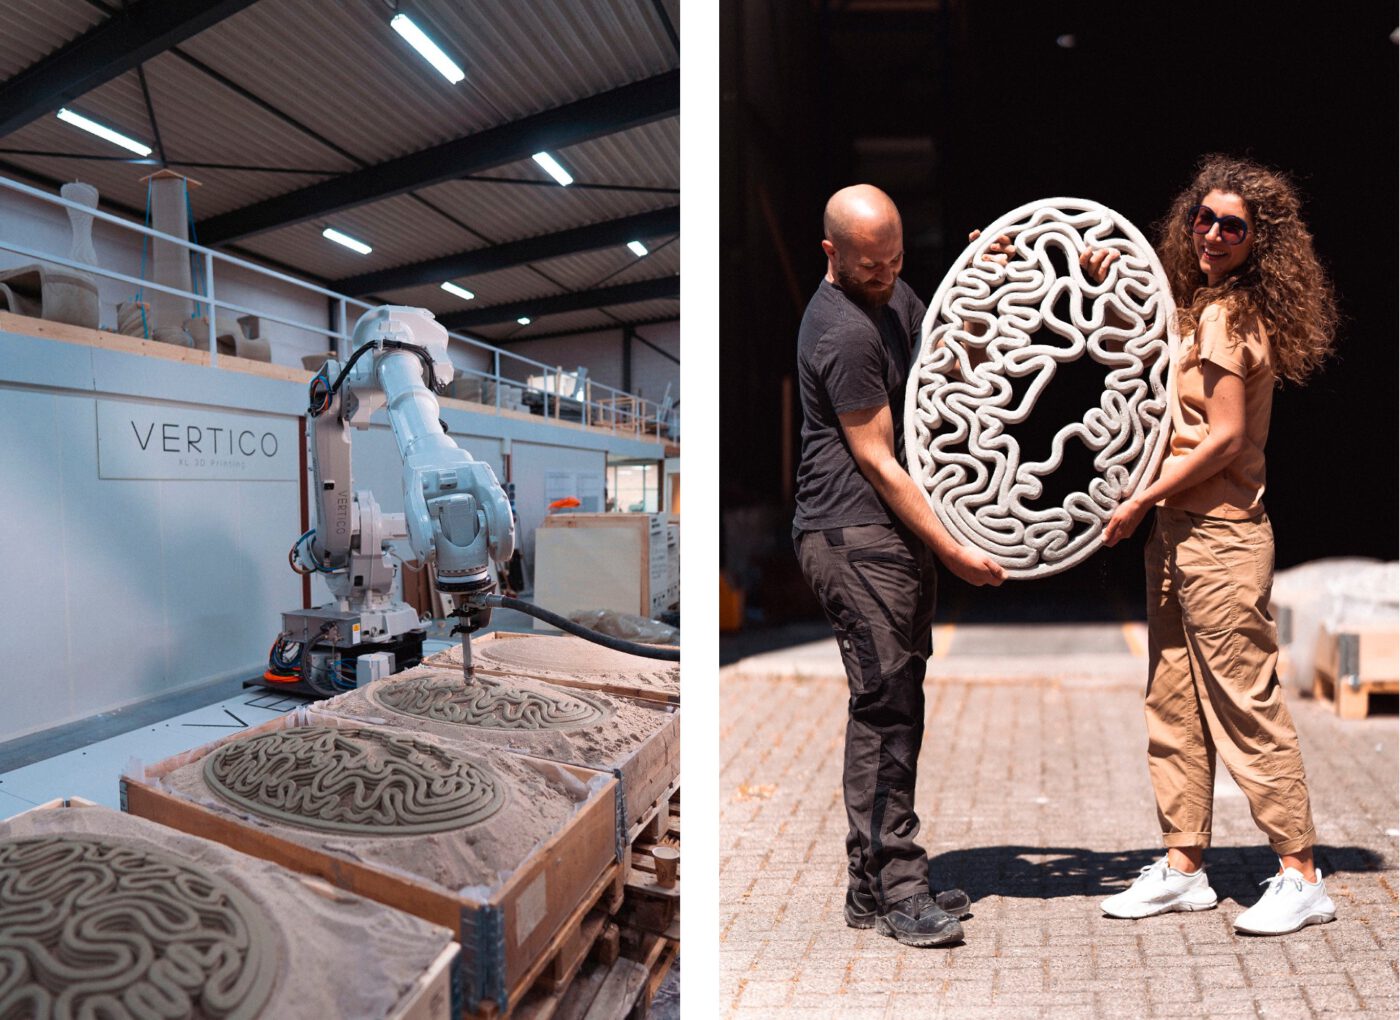 Circular moulds of sand were used as the basis for 3D printing the concrete into a double-curved shape.